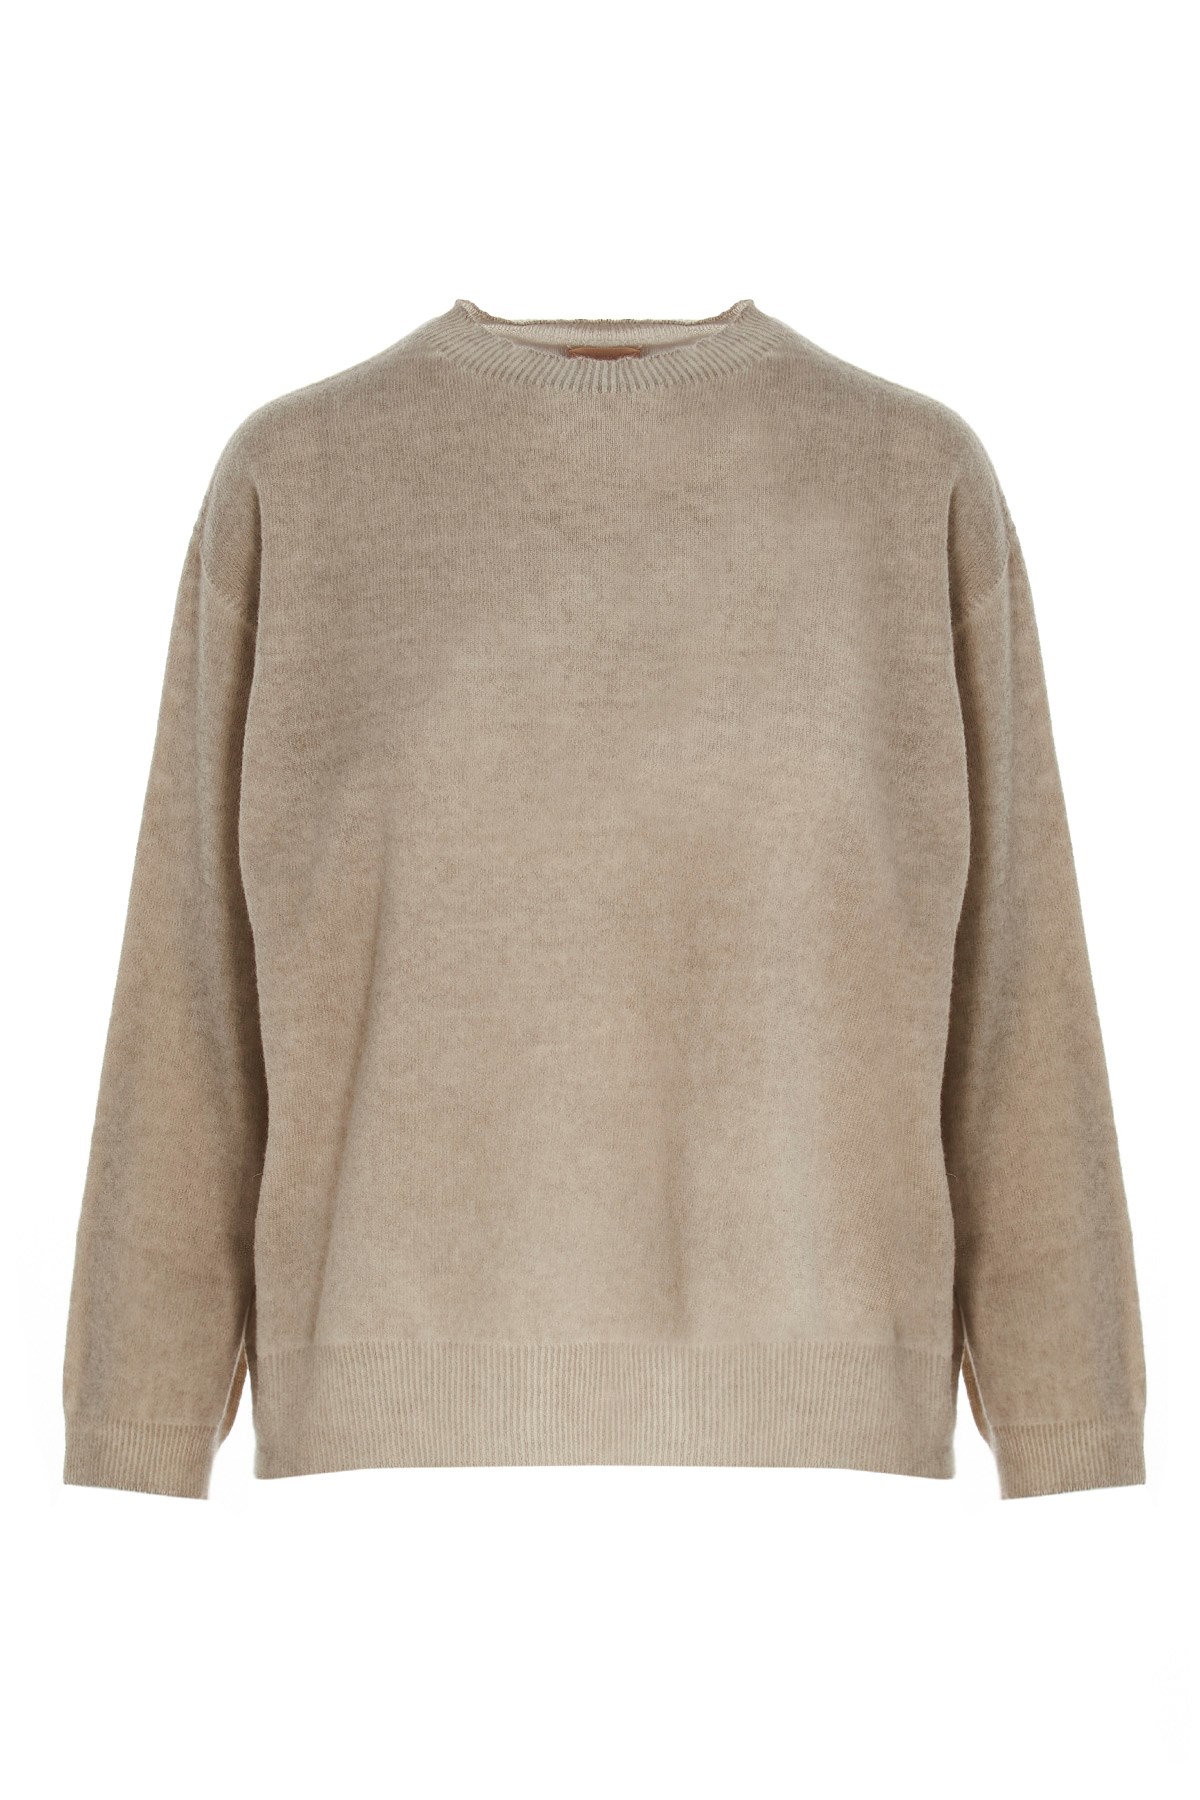 NUDE Mixed Cashmere Sweater